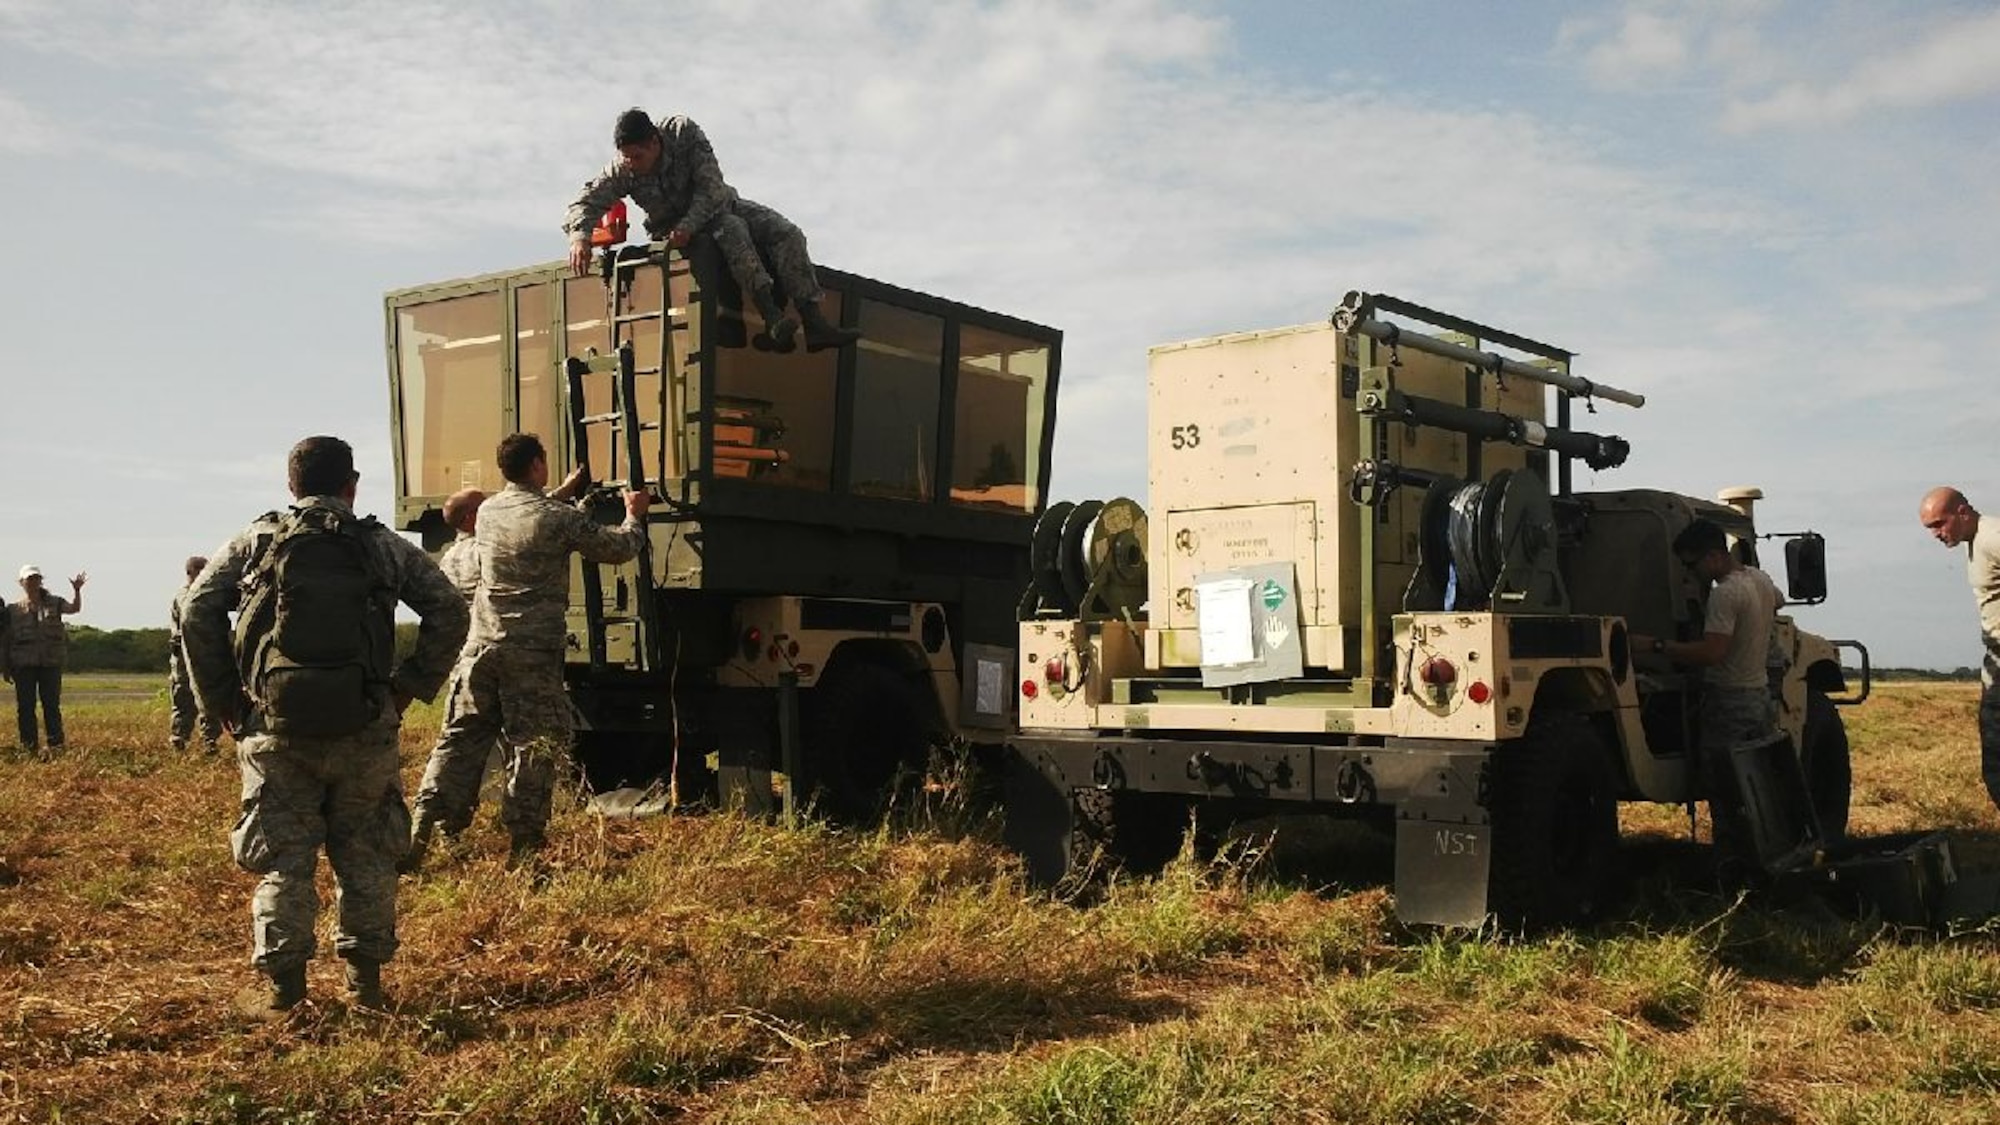 An Air Force team sets up a mobile air traffic control tower at Eloy Alfaro International Airport in Manta, Ecuador, April 26, 2016. The portable tower will help local controllers increase the flow of humanitarian aid entering the country. The United States, in coordination with the Ecuadorian government, deployed 12 U.S Airmen to Ecuador to support international relief efforts for victims of a 7.8-magnitude earthquake. (Courtesy photo/U.S. Embassy Quito)